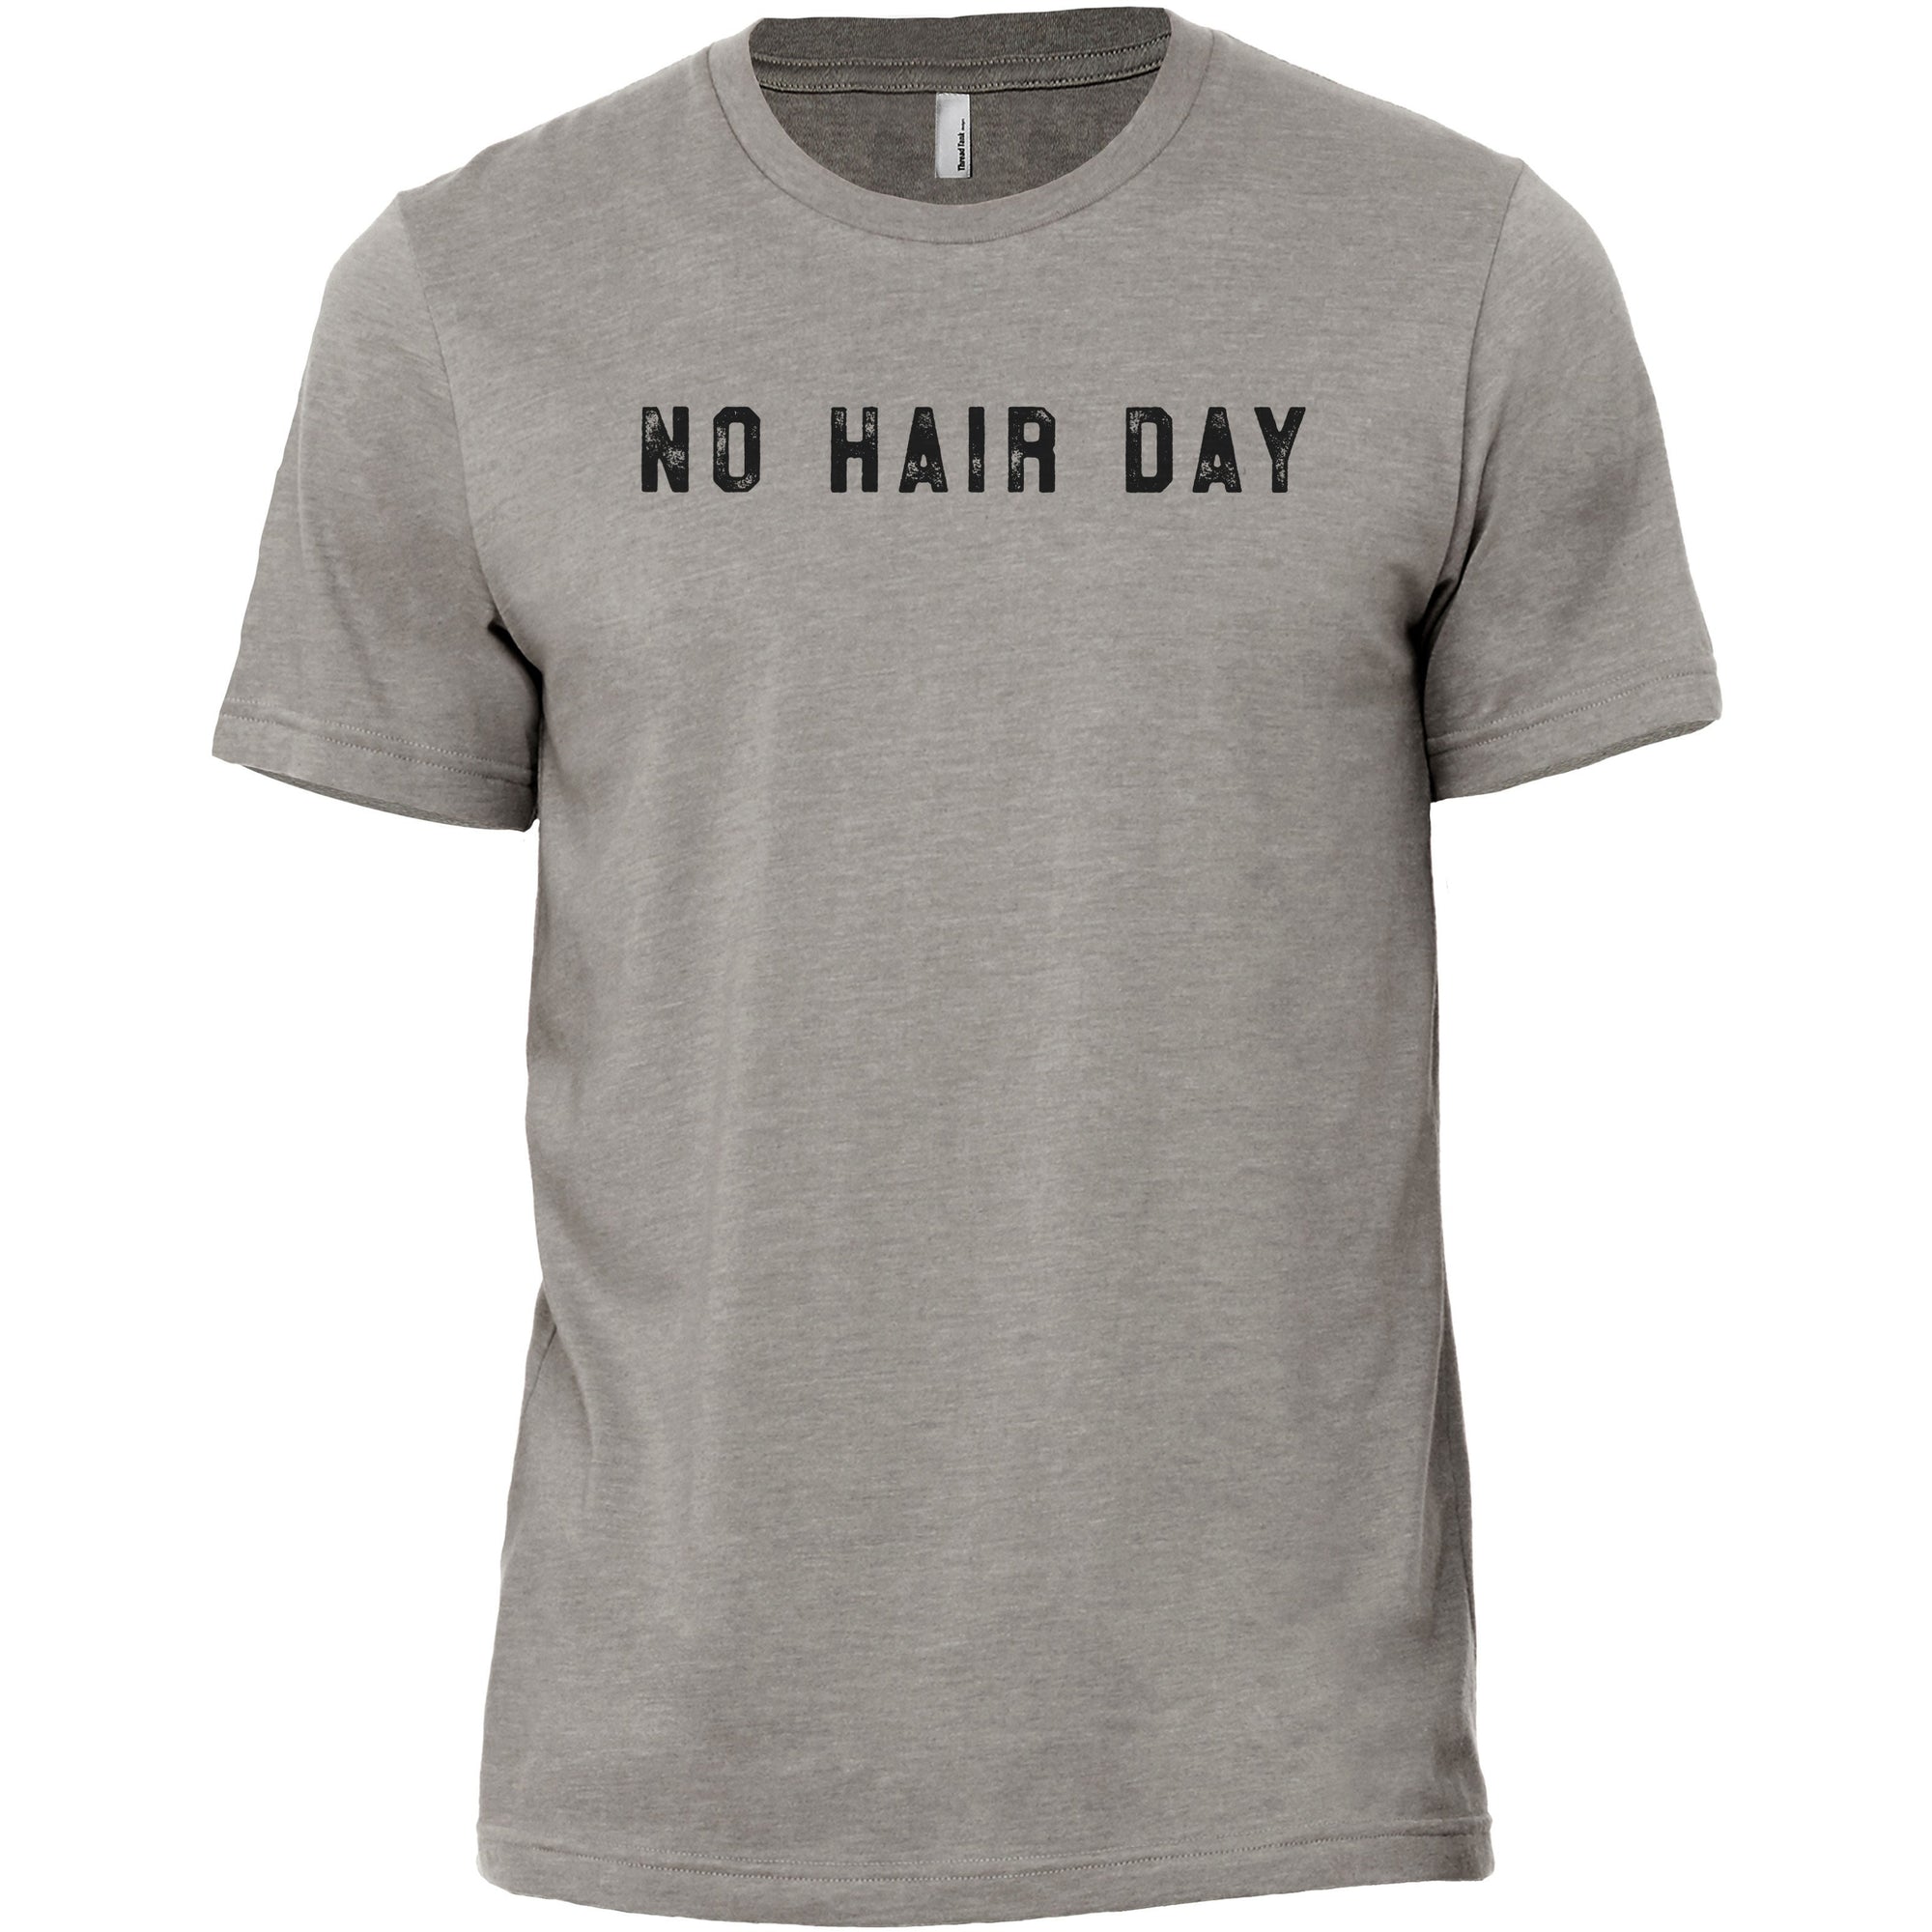 No Hair Day Military Grey Printed Graphic Men's Crew T-Shirt Tee